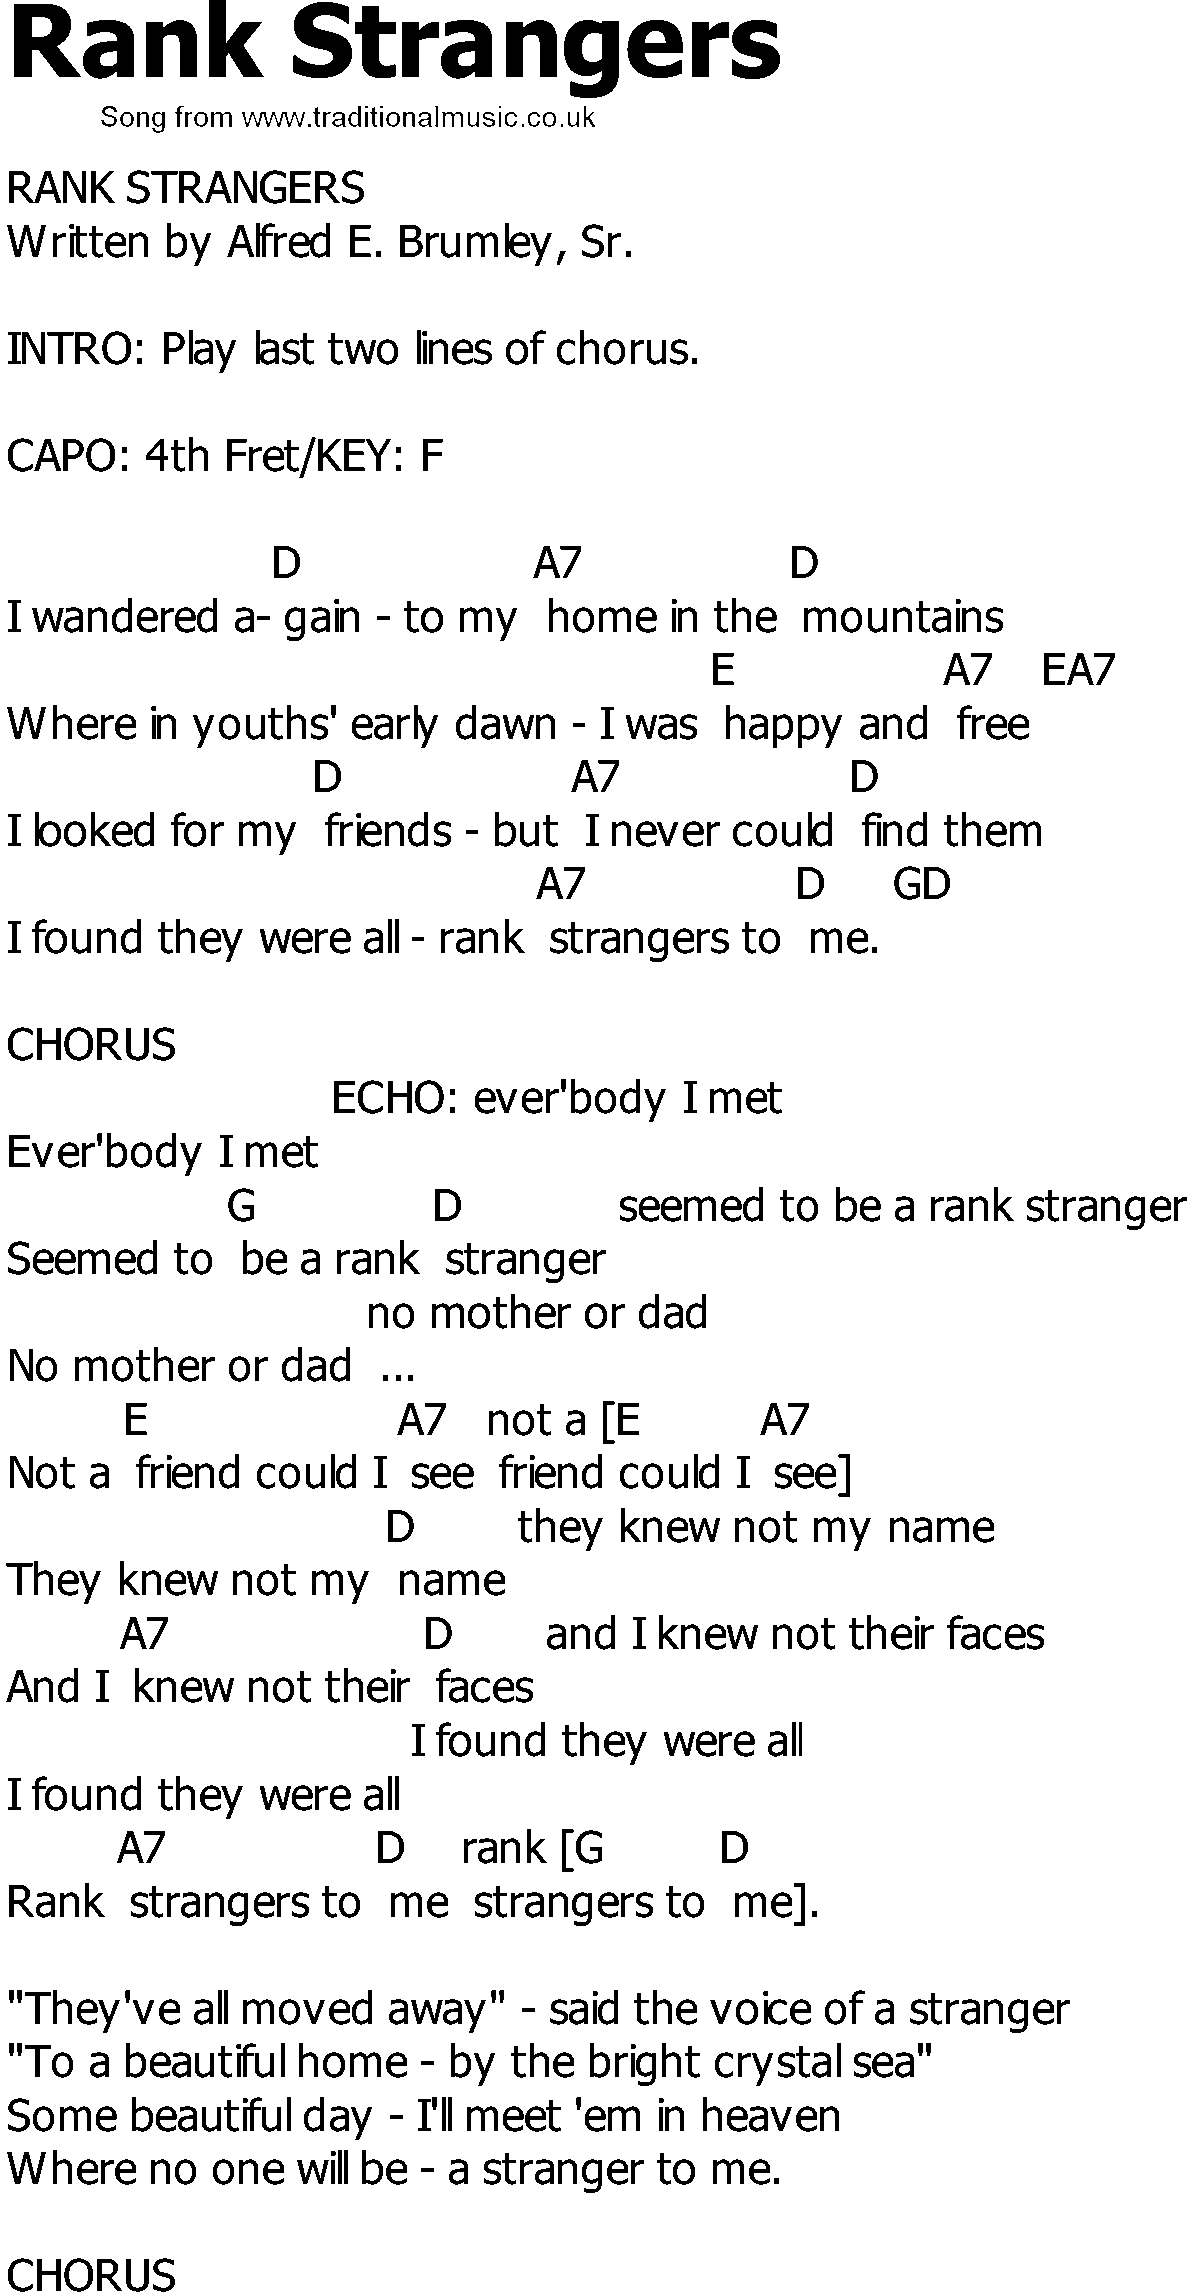 Old Country song lyrics with chords - Rank Strangers